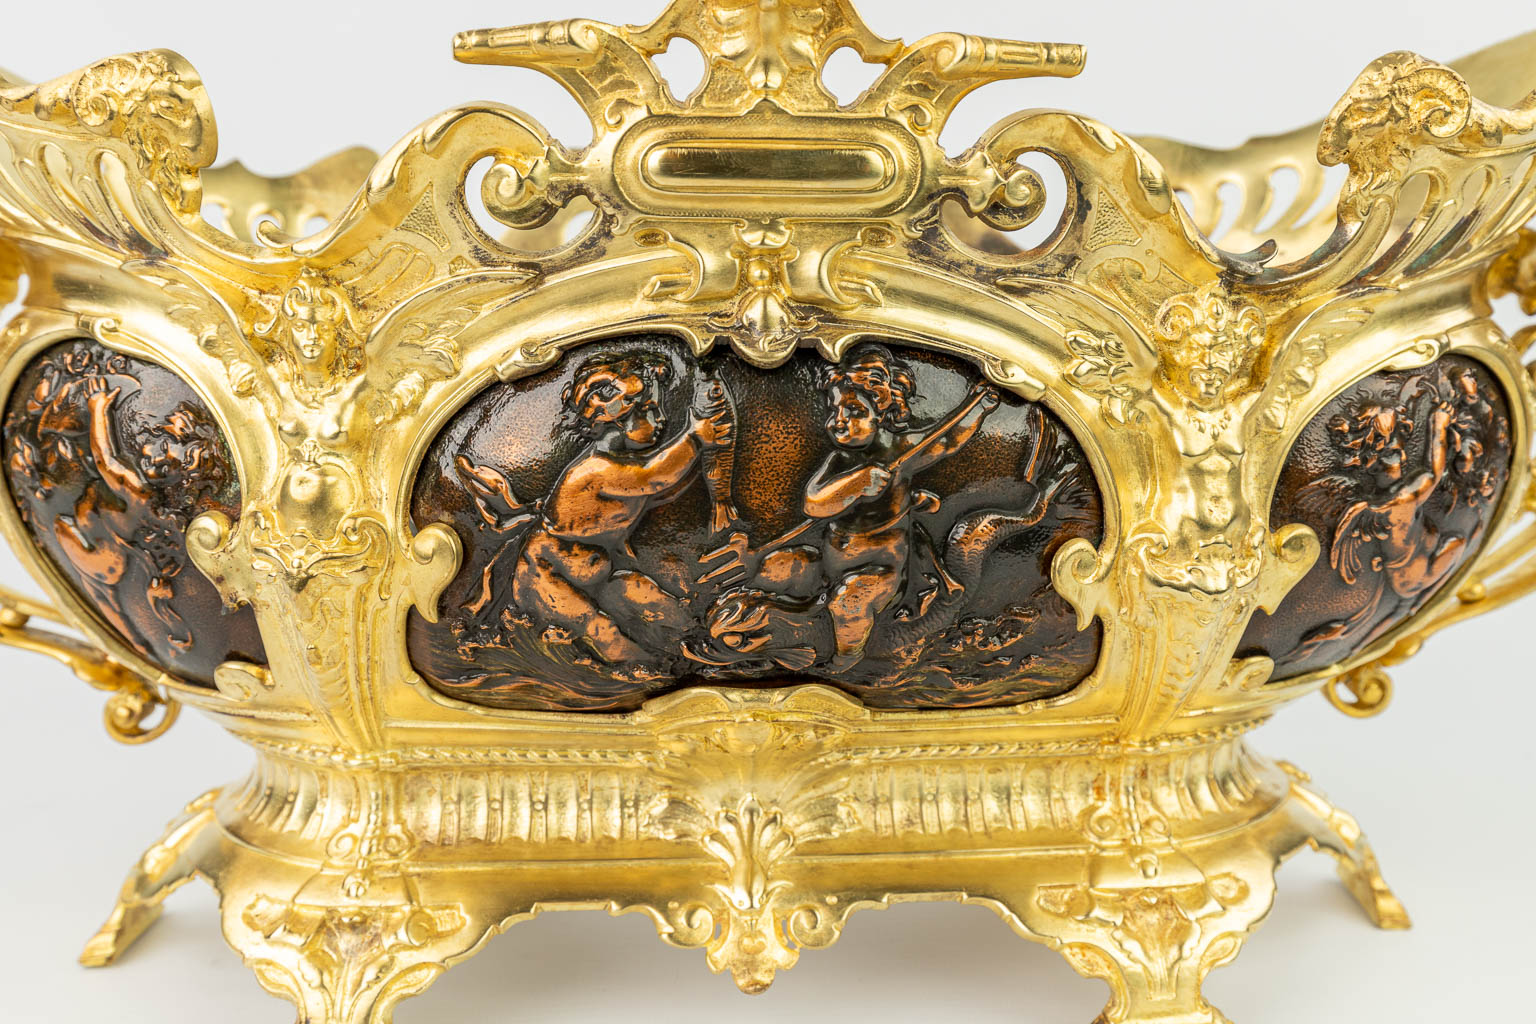 A three-piece mantle garniture made of jardinières, copper and gilt bronze decorated with putti. (H:22cm)